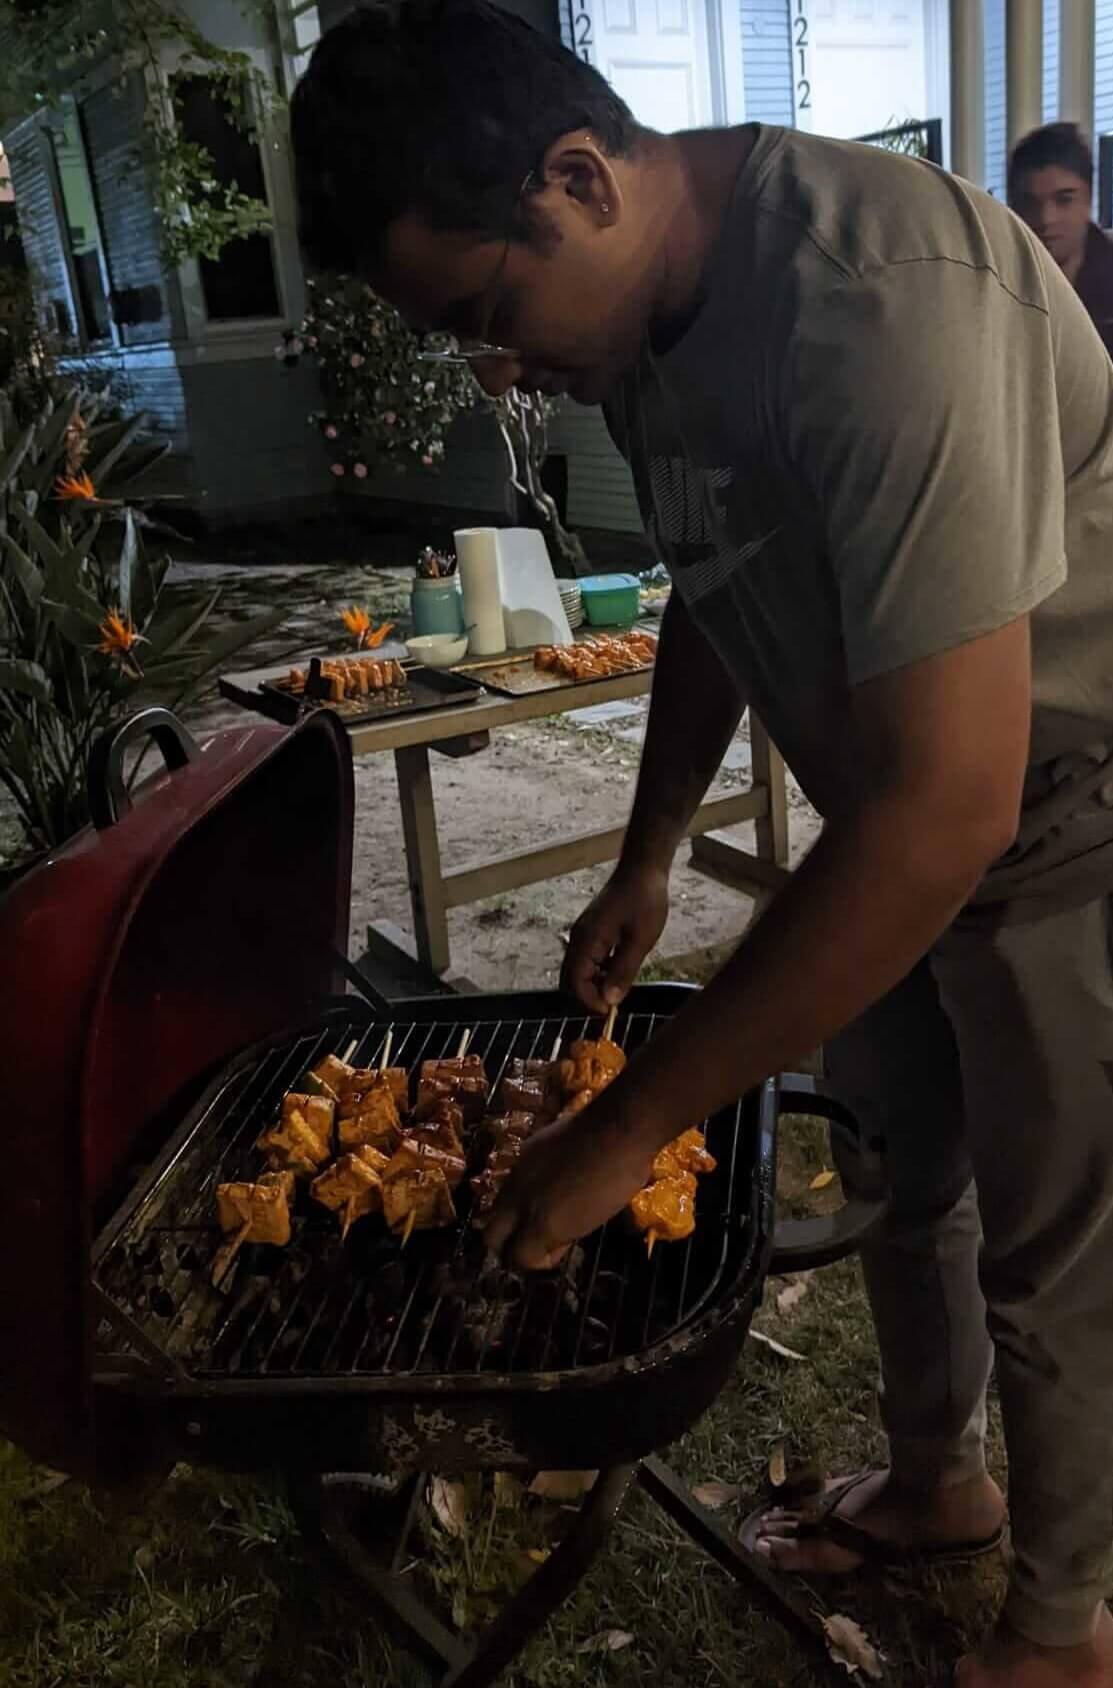 student cooking food on grill at night